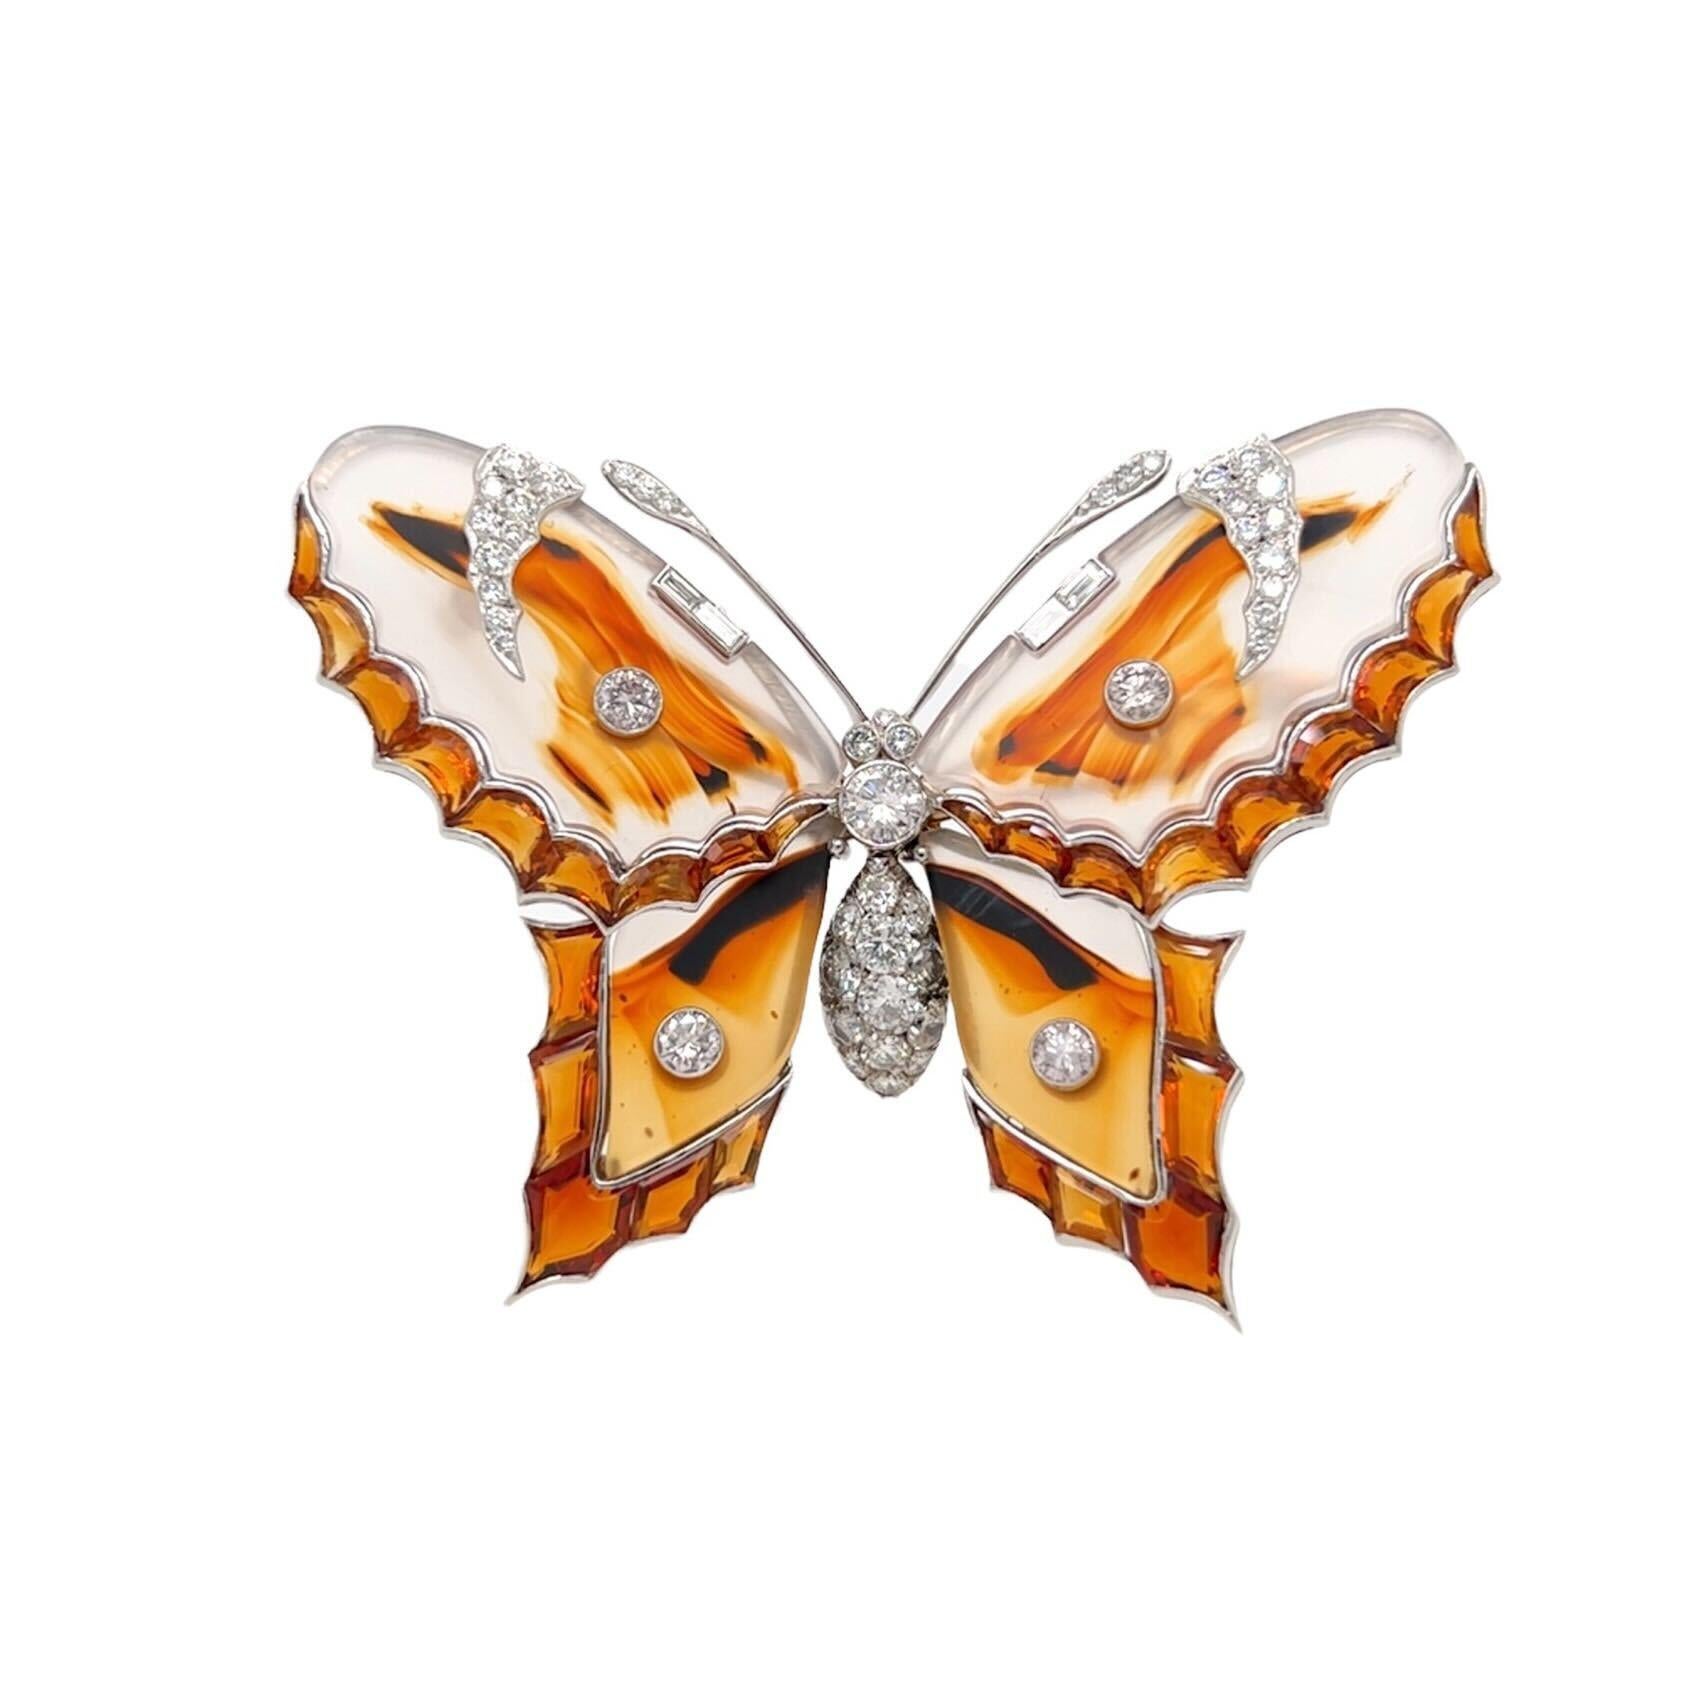 A Platinum, Gold, Agage, Citrine and Diamond Butterfly Brooch.